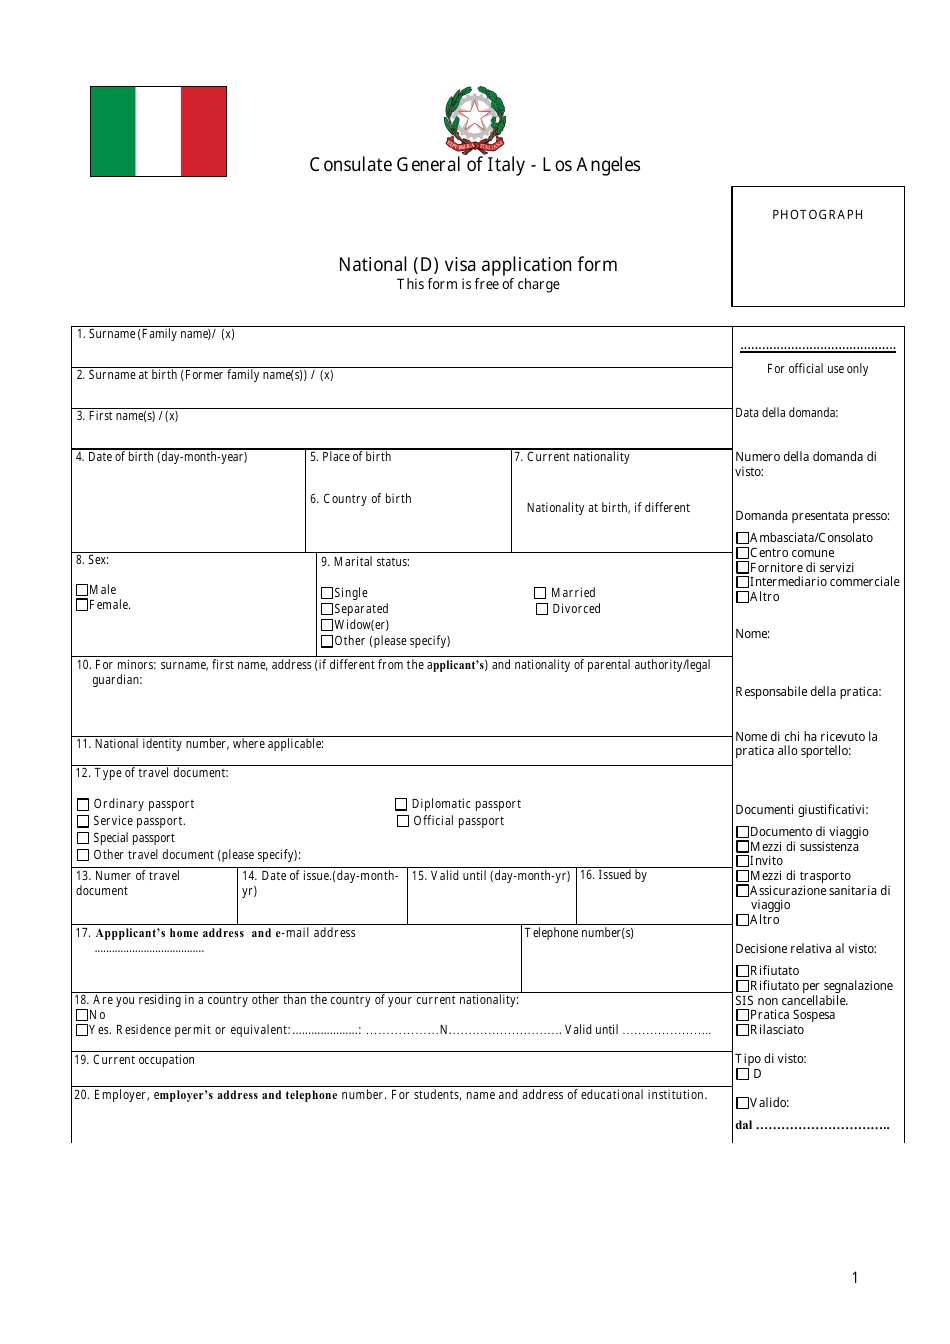 Italy National (D) Visa Application Form - Consulate General of Italy - Los Angeles, California, Page 1